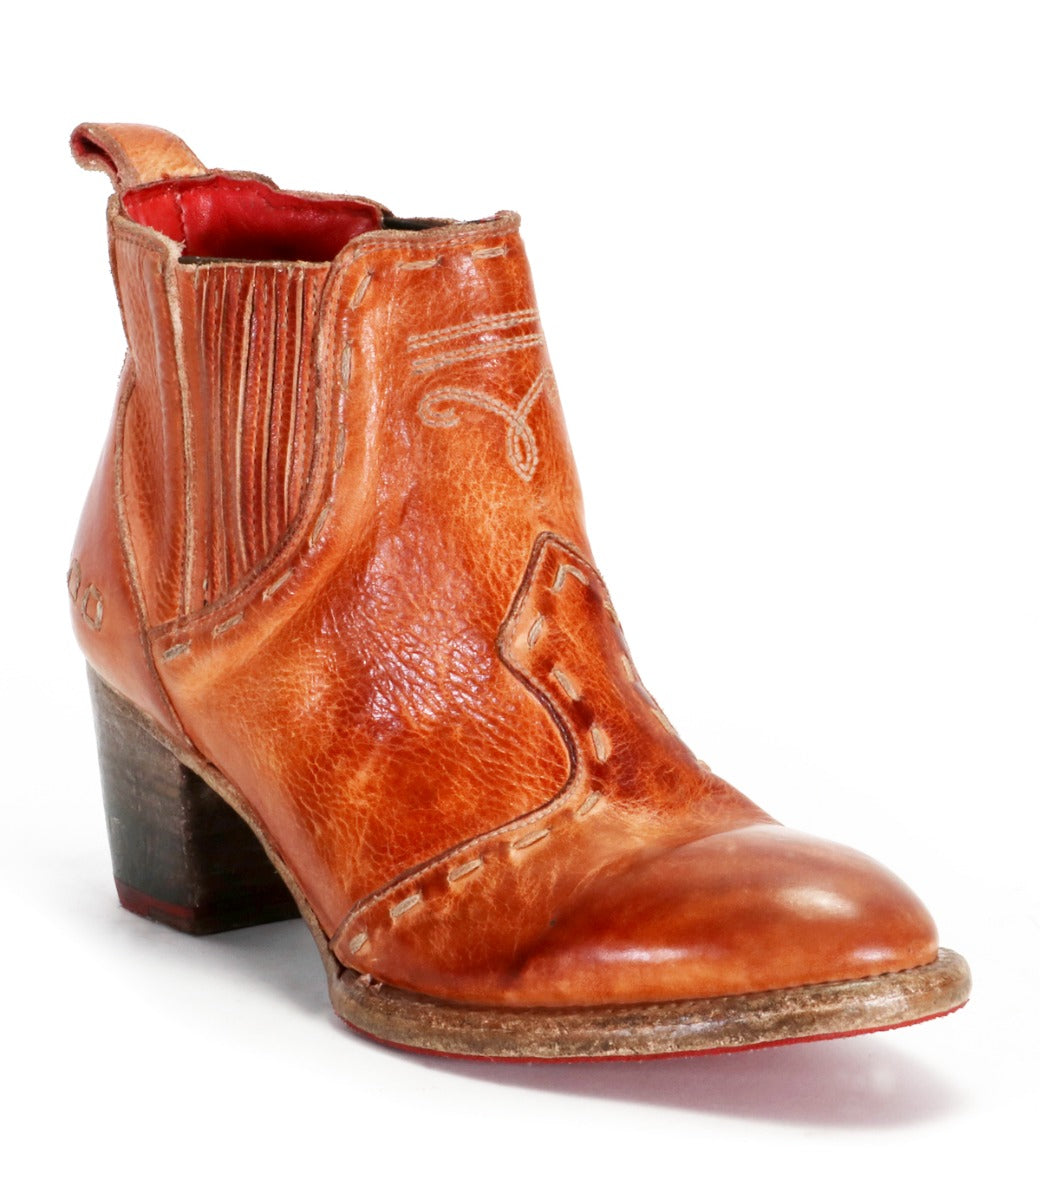 A Brie II ankle boot with a wooden heel by Bed Stu.